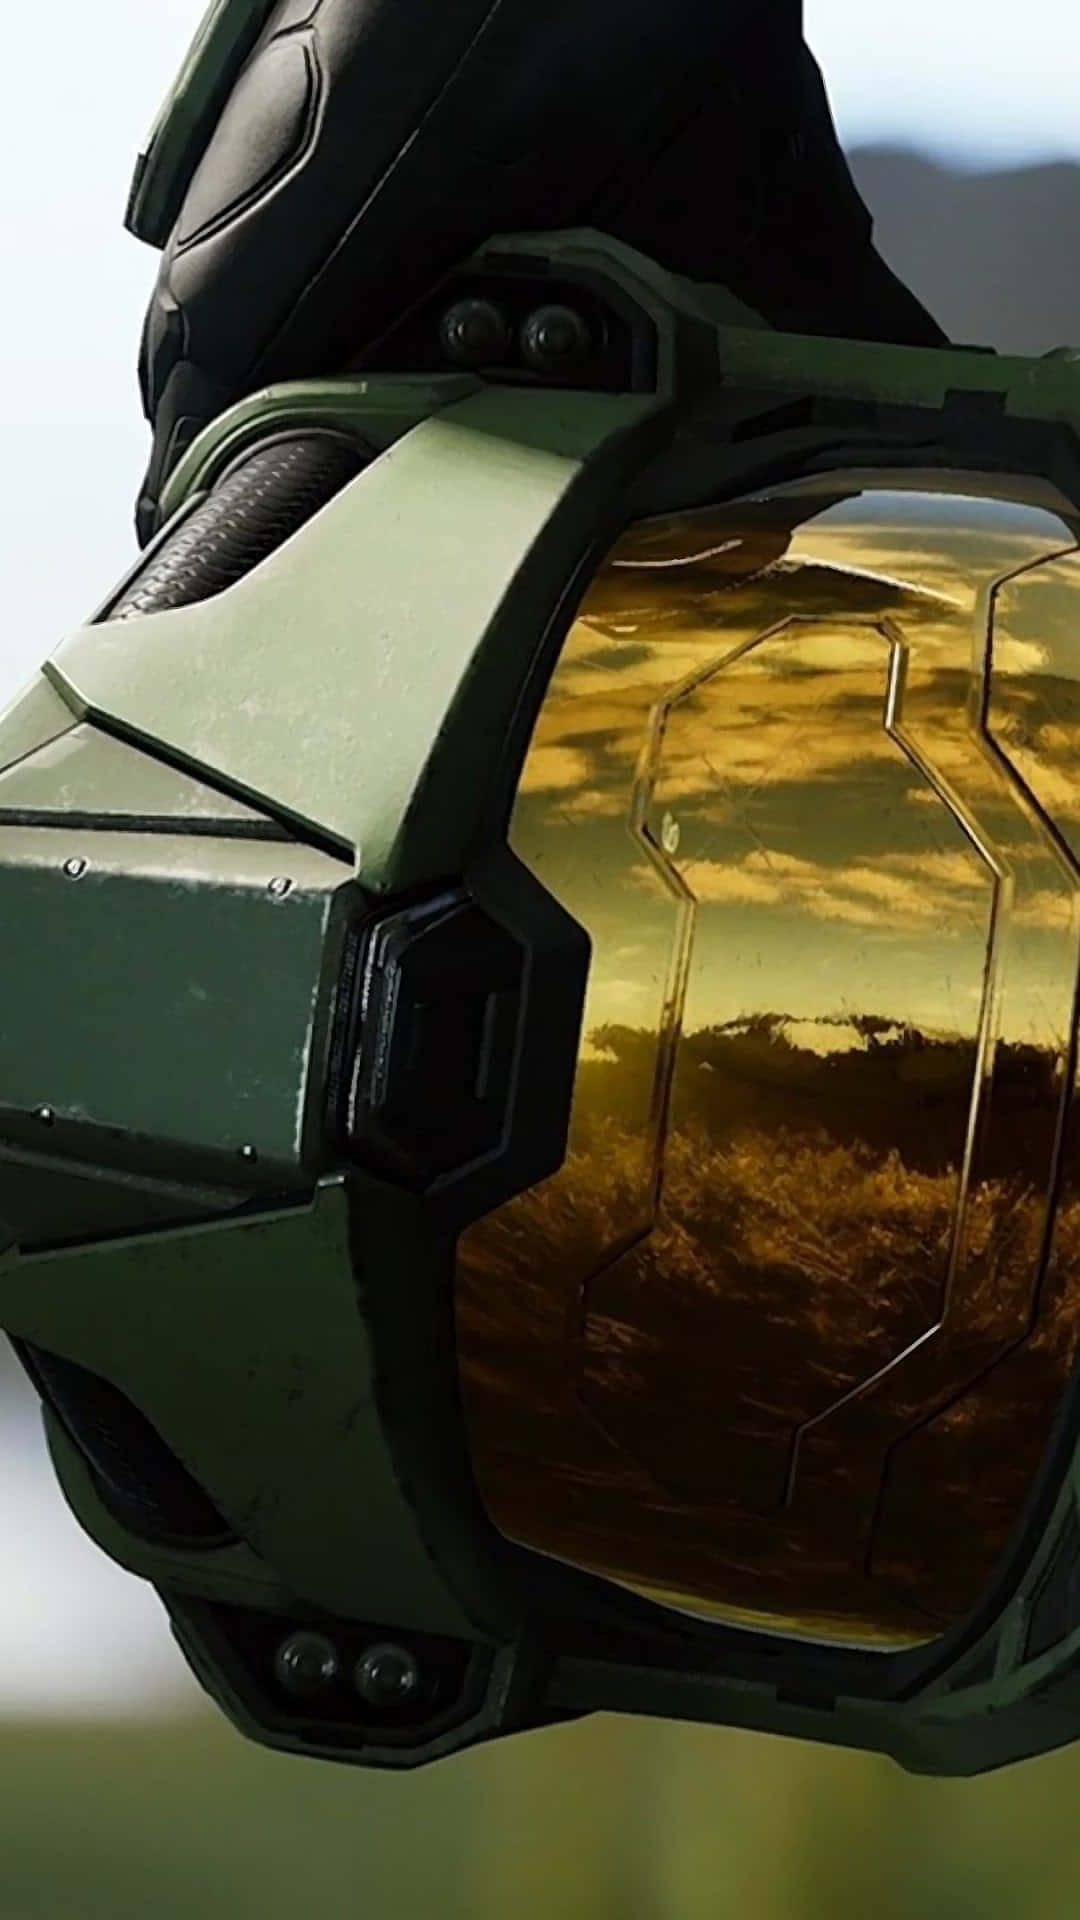 Unlock The Power Of Master Chief With His Stylized Phone Wallpaper